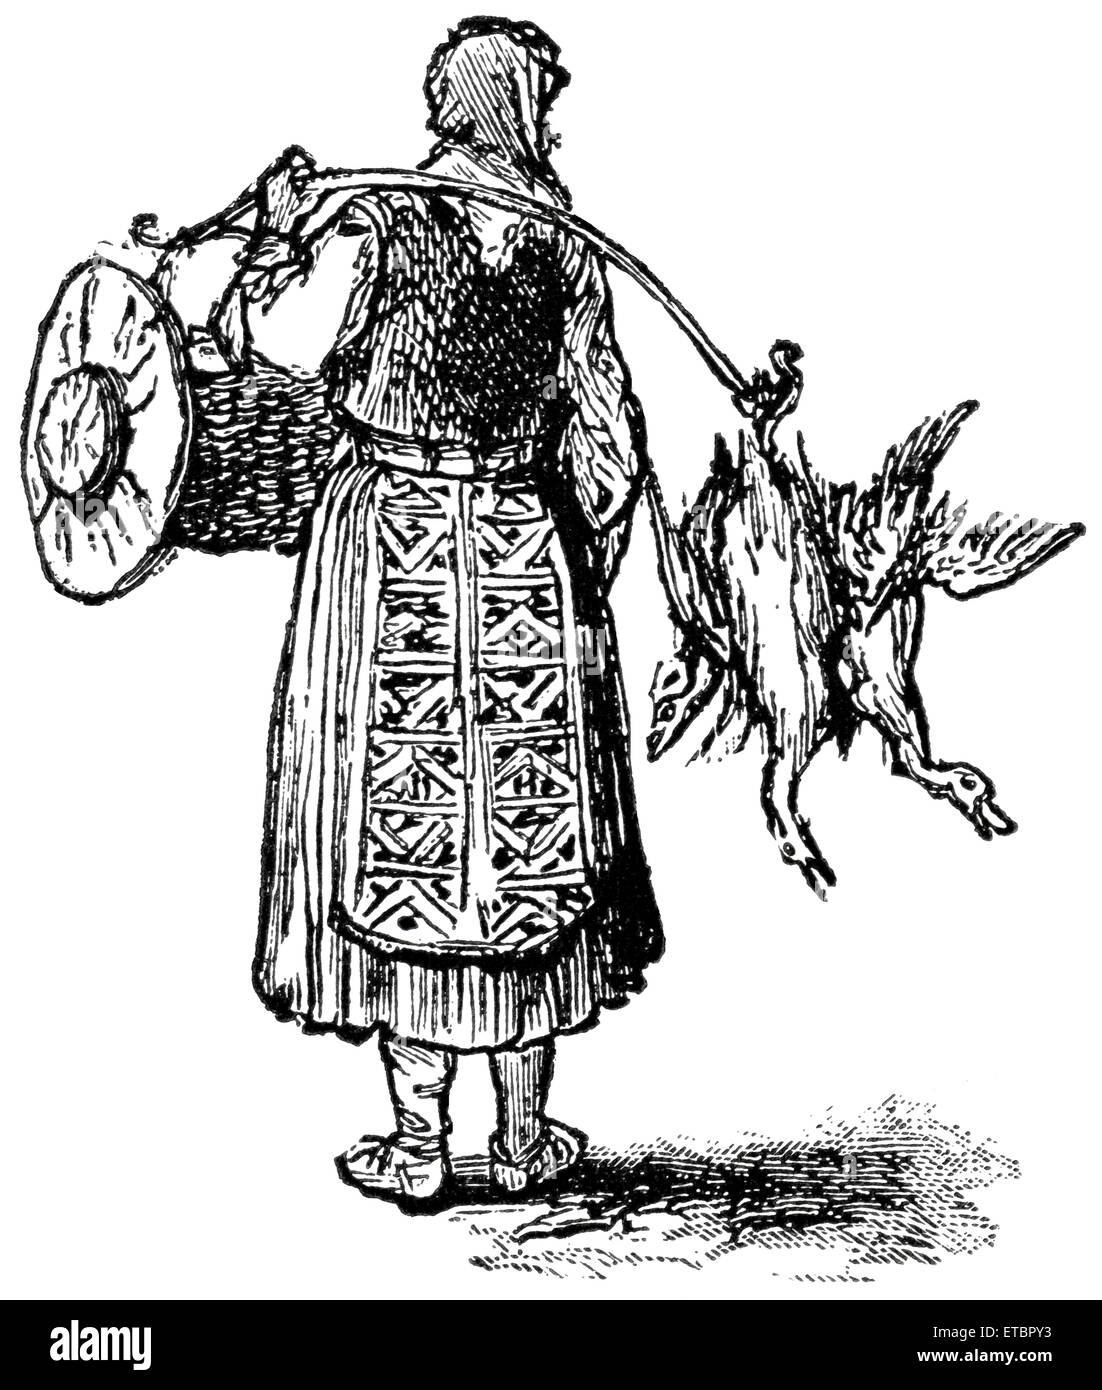 Serbian Woman on Way to Market,  'Classical Portfolio of Primitive Carriers', by Marshall M. Kirman, World Railway Publ. Co., Illustration, 1895 Stock Photo